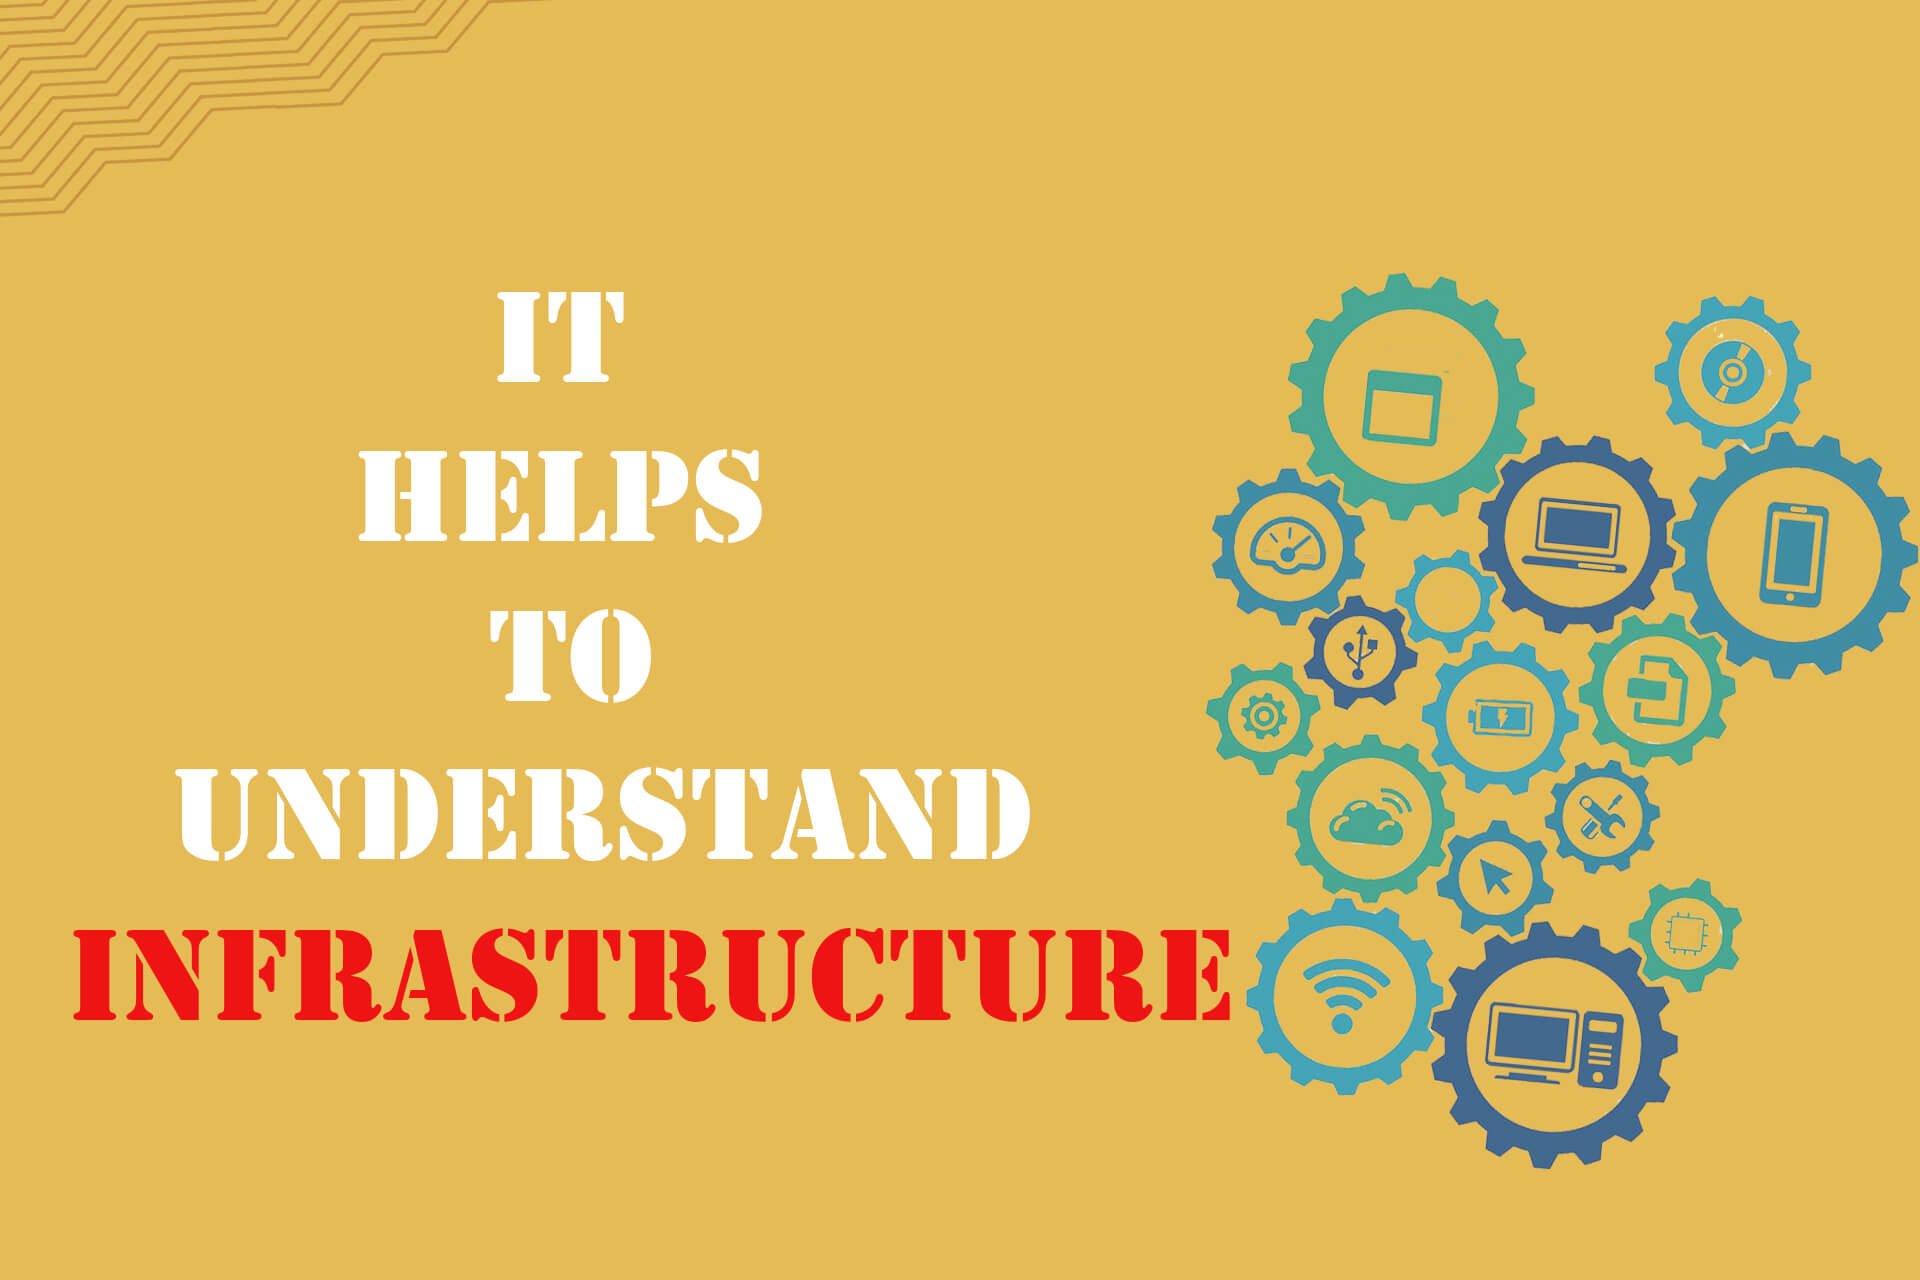 Business Plan will help you to understand infrastructure